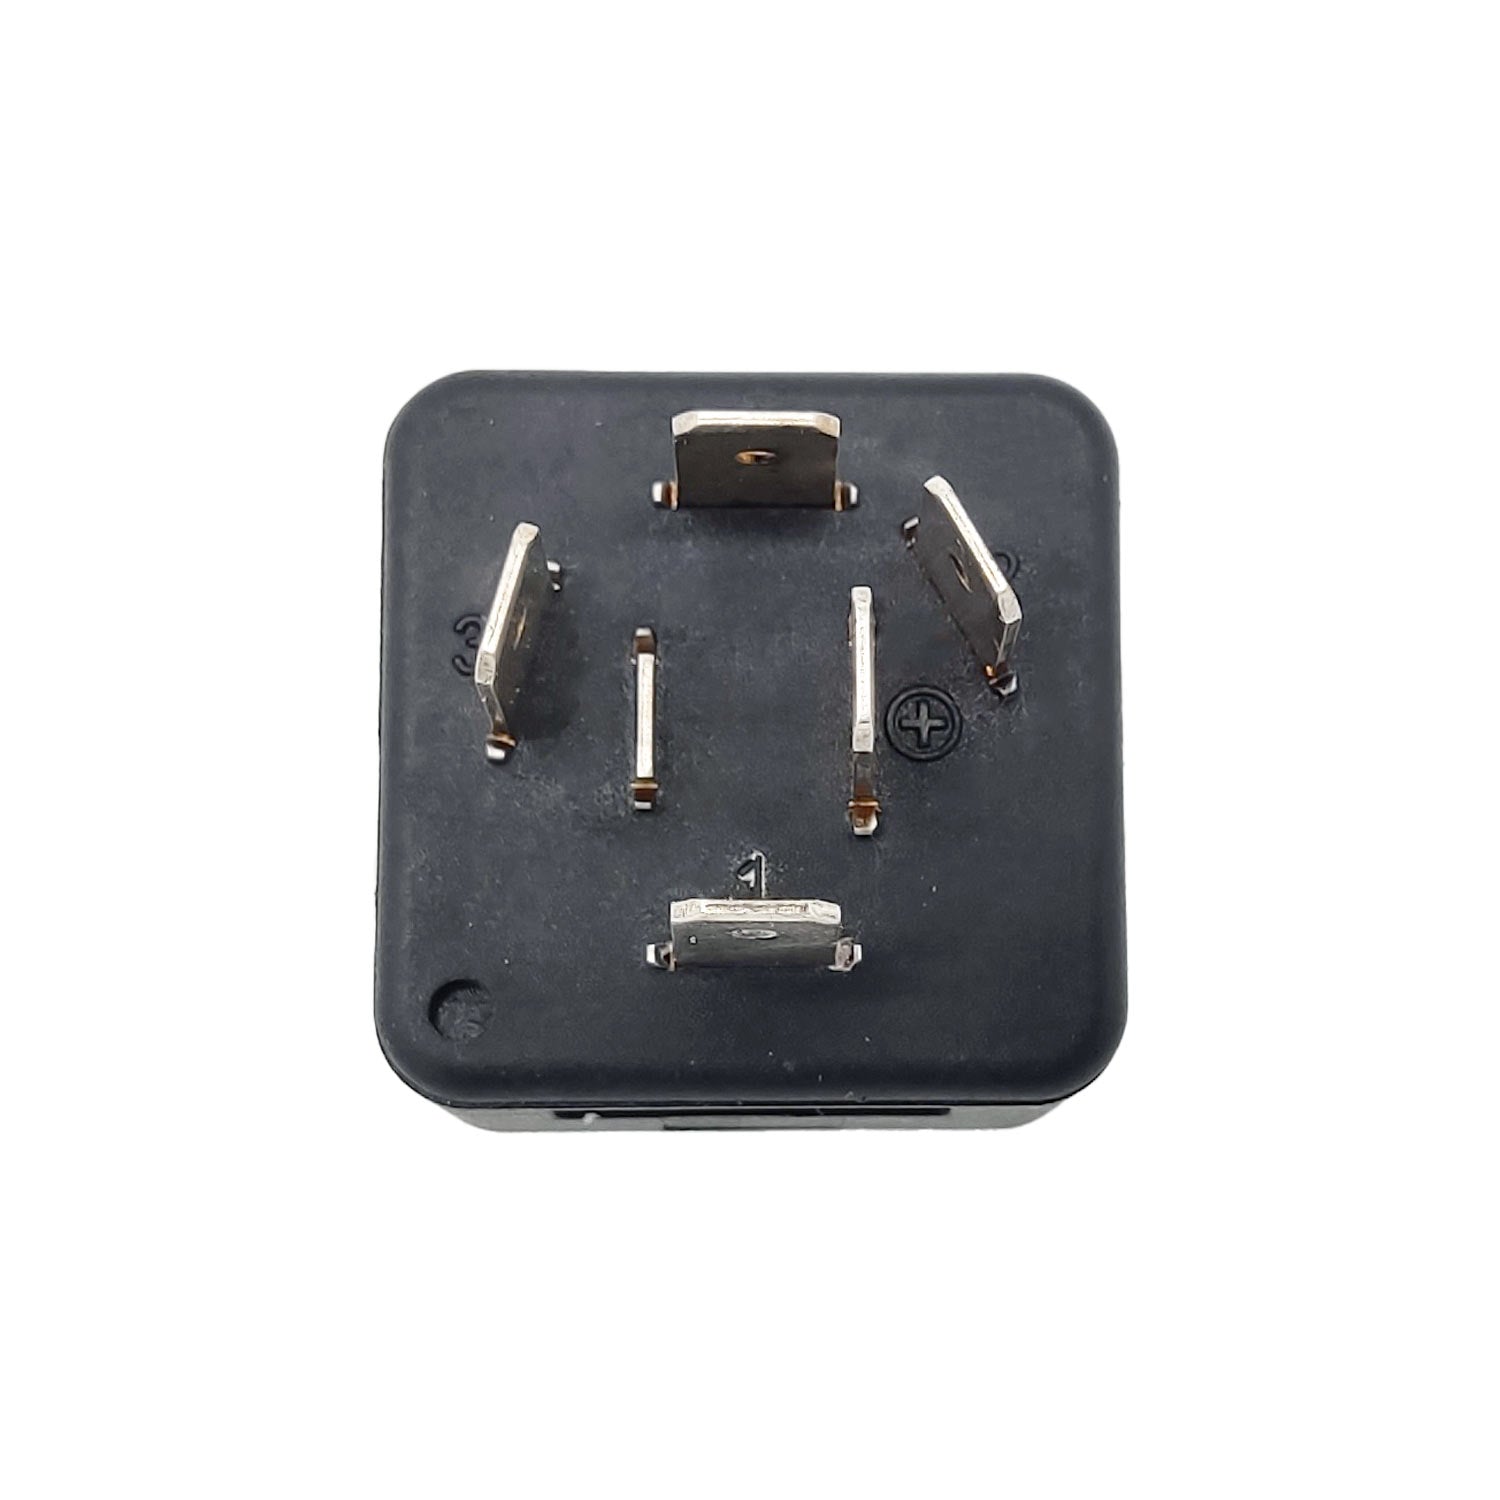 Çevirmeli Anahtar Rotary Switch 5 Pin (Off-On-On-On / 0-1-2-3) Referans OE: 70525150, K816810140900